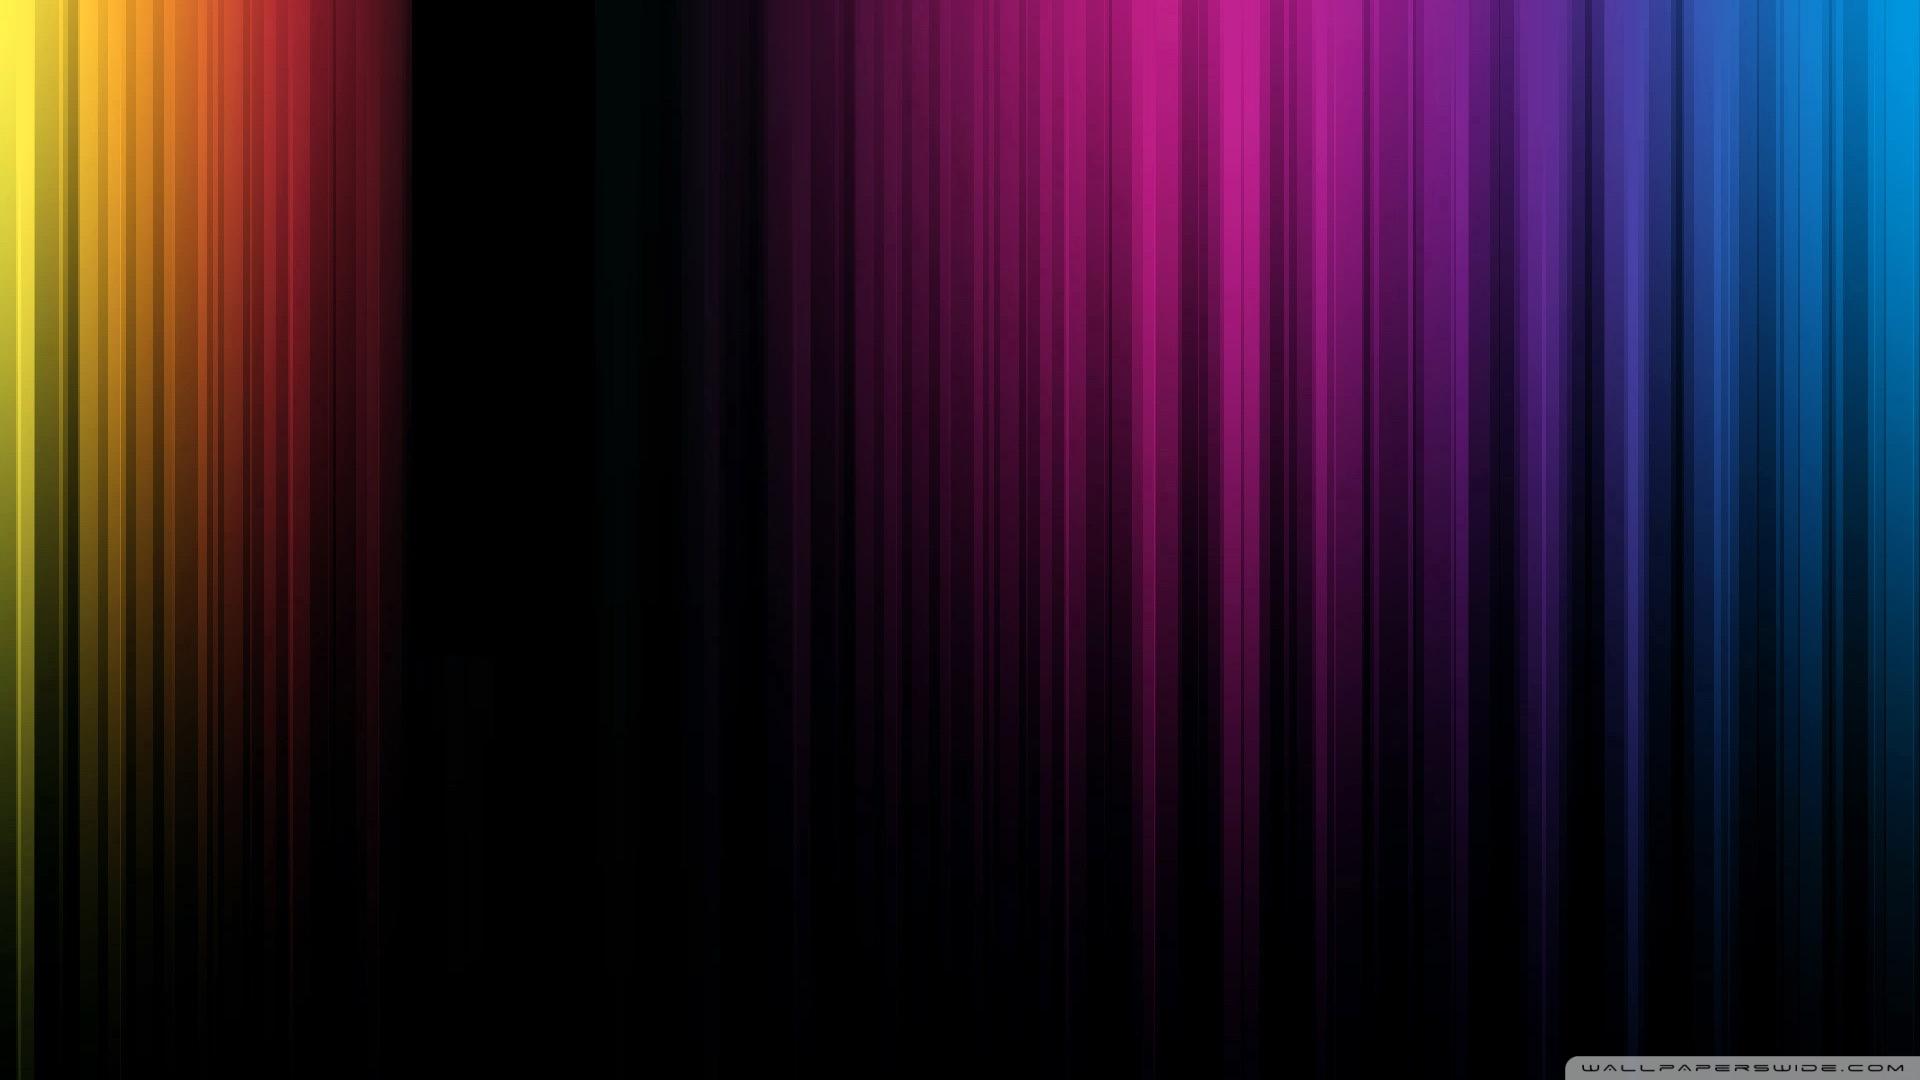 Wallpaper Blink of Stripes Wallpaper HD for Android, Windows